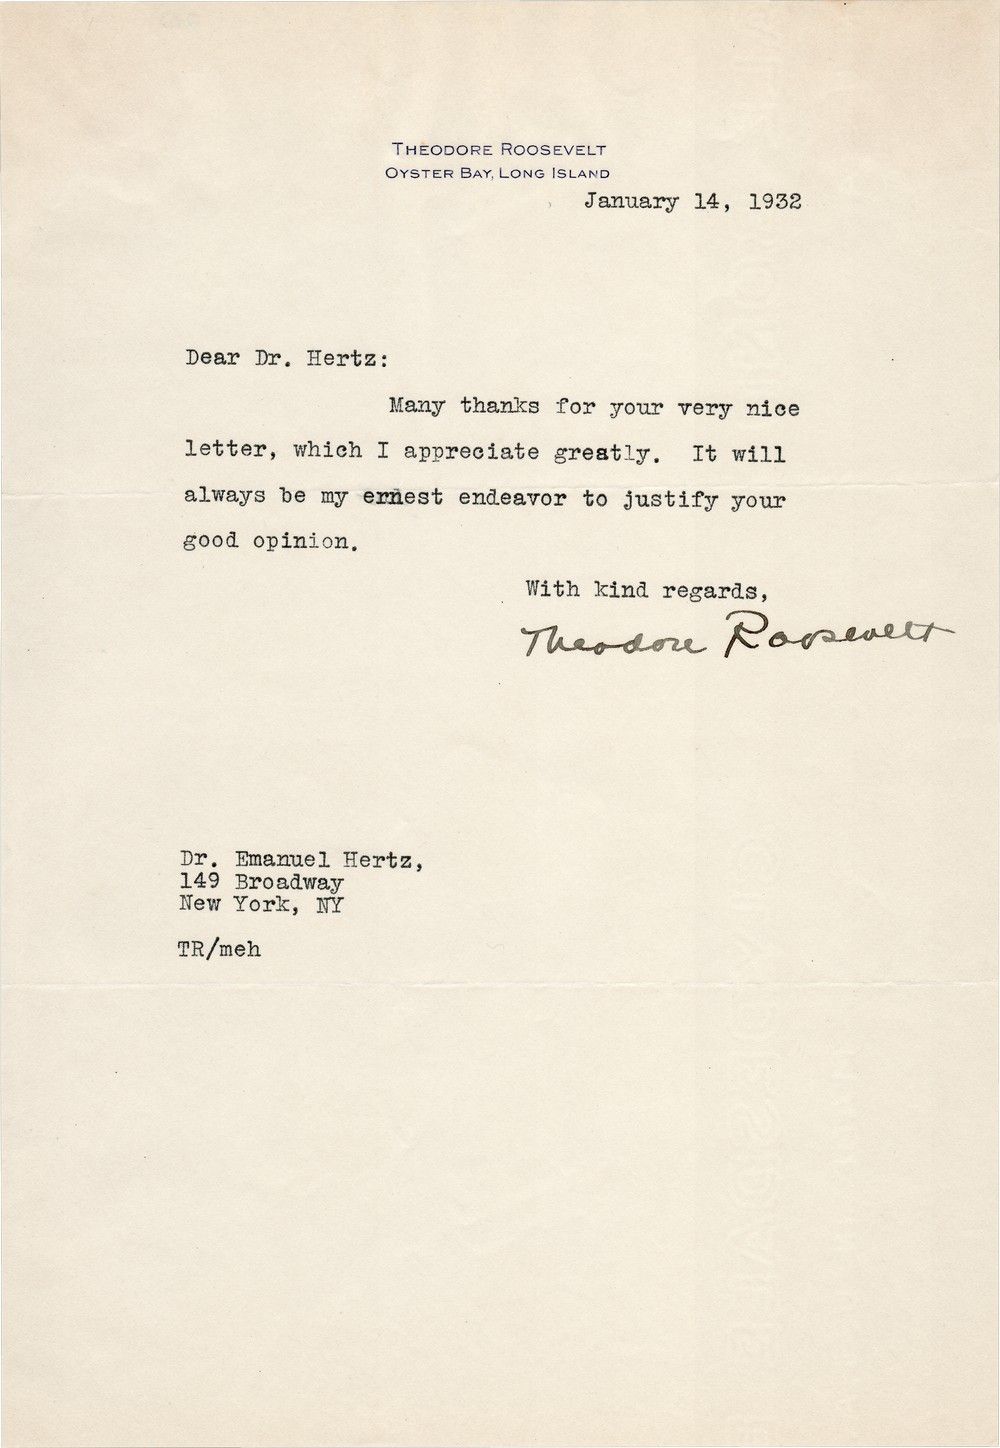 Theodore Roosevelt Jr. Tells Emanuel Hertz He Will Always Try to Justify His Good Opinion